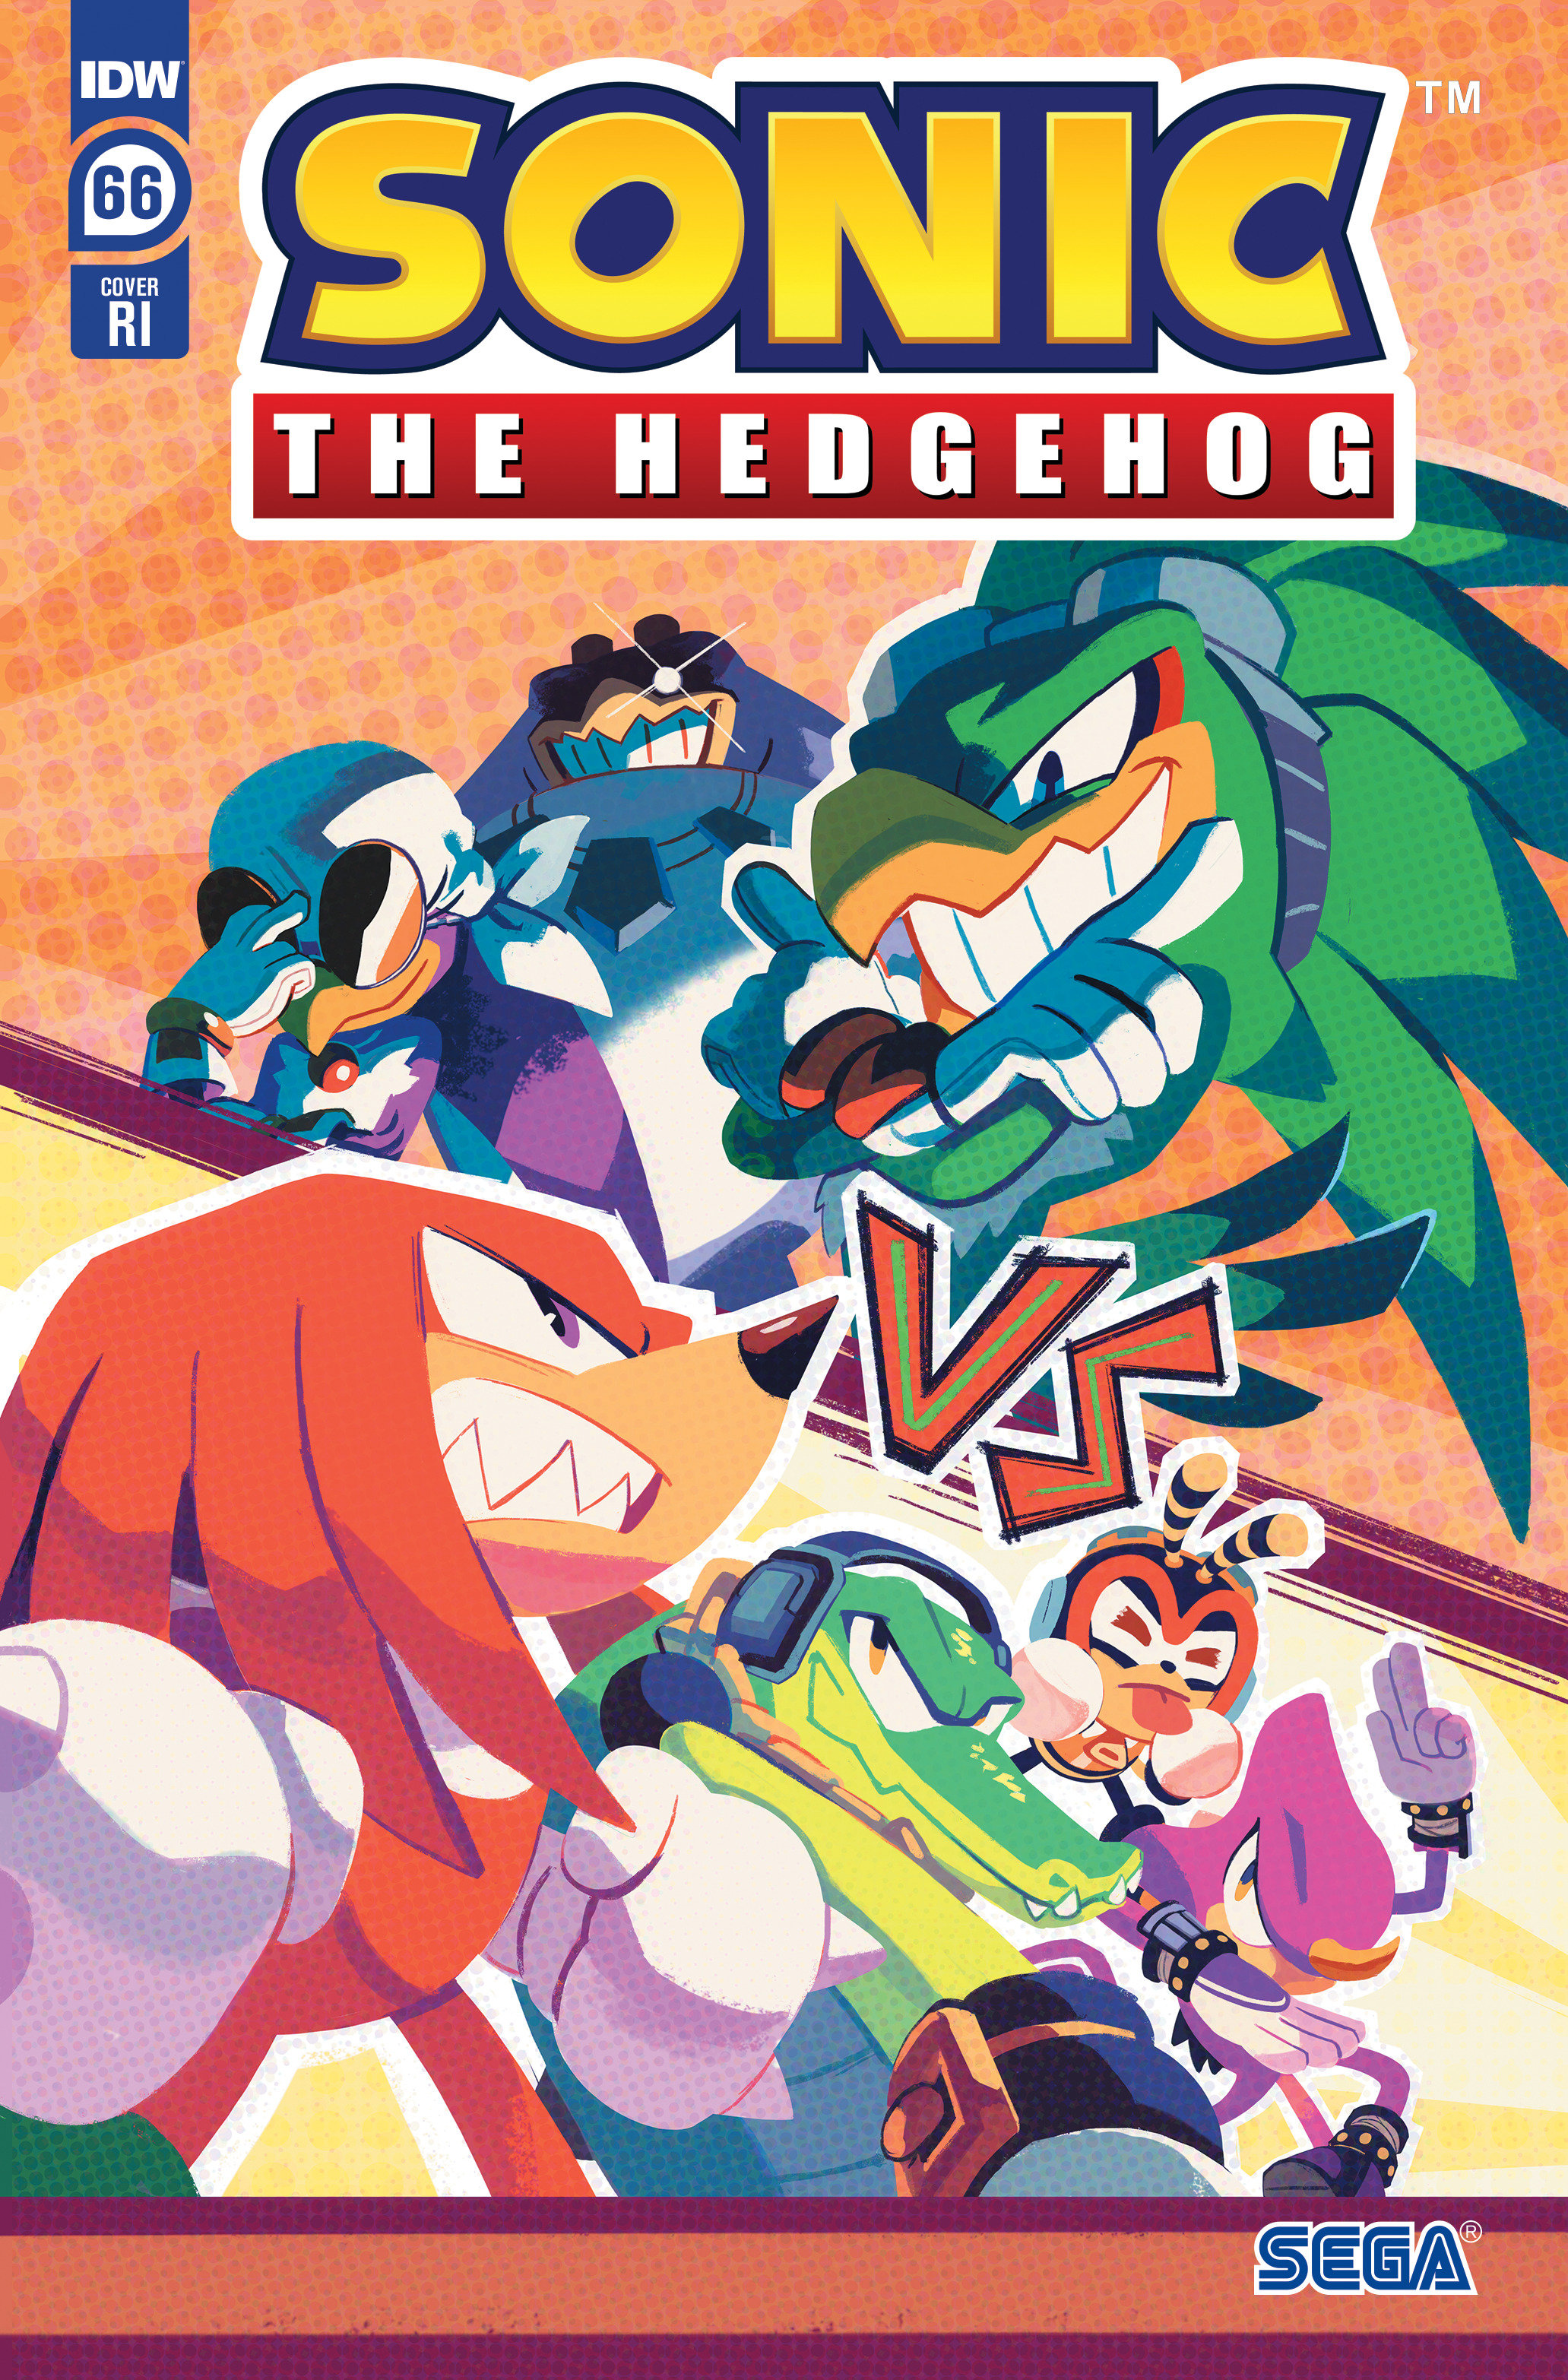 Sonic the Hedgehog #66 Cover Fourdraine 1 for 10 Incentive